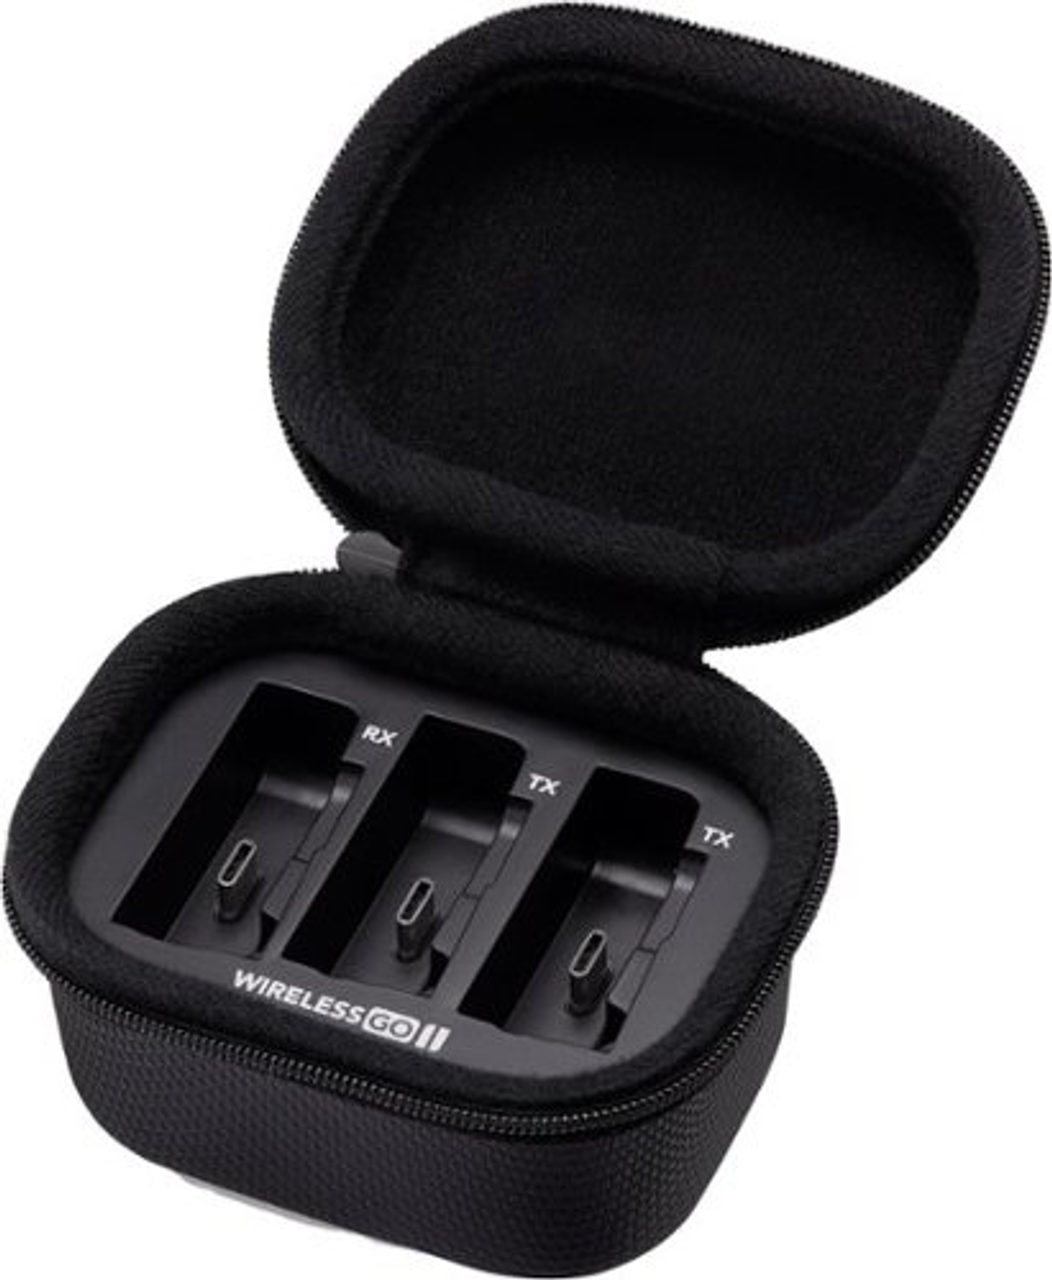 RØDE - CHARGE CASE Charging Case for the Wireless Go II - Black